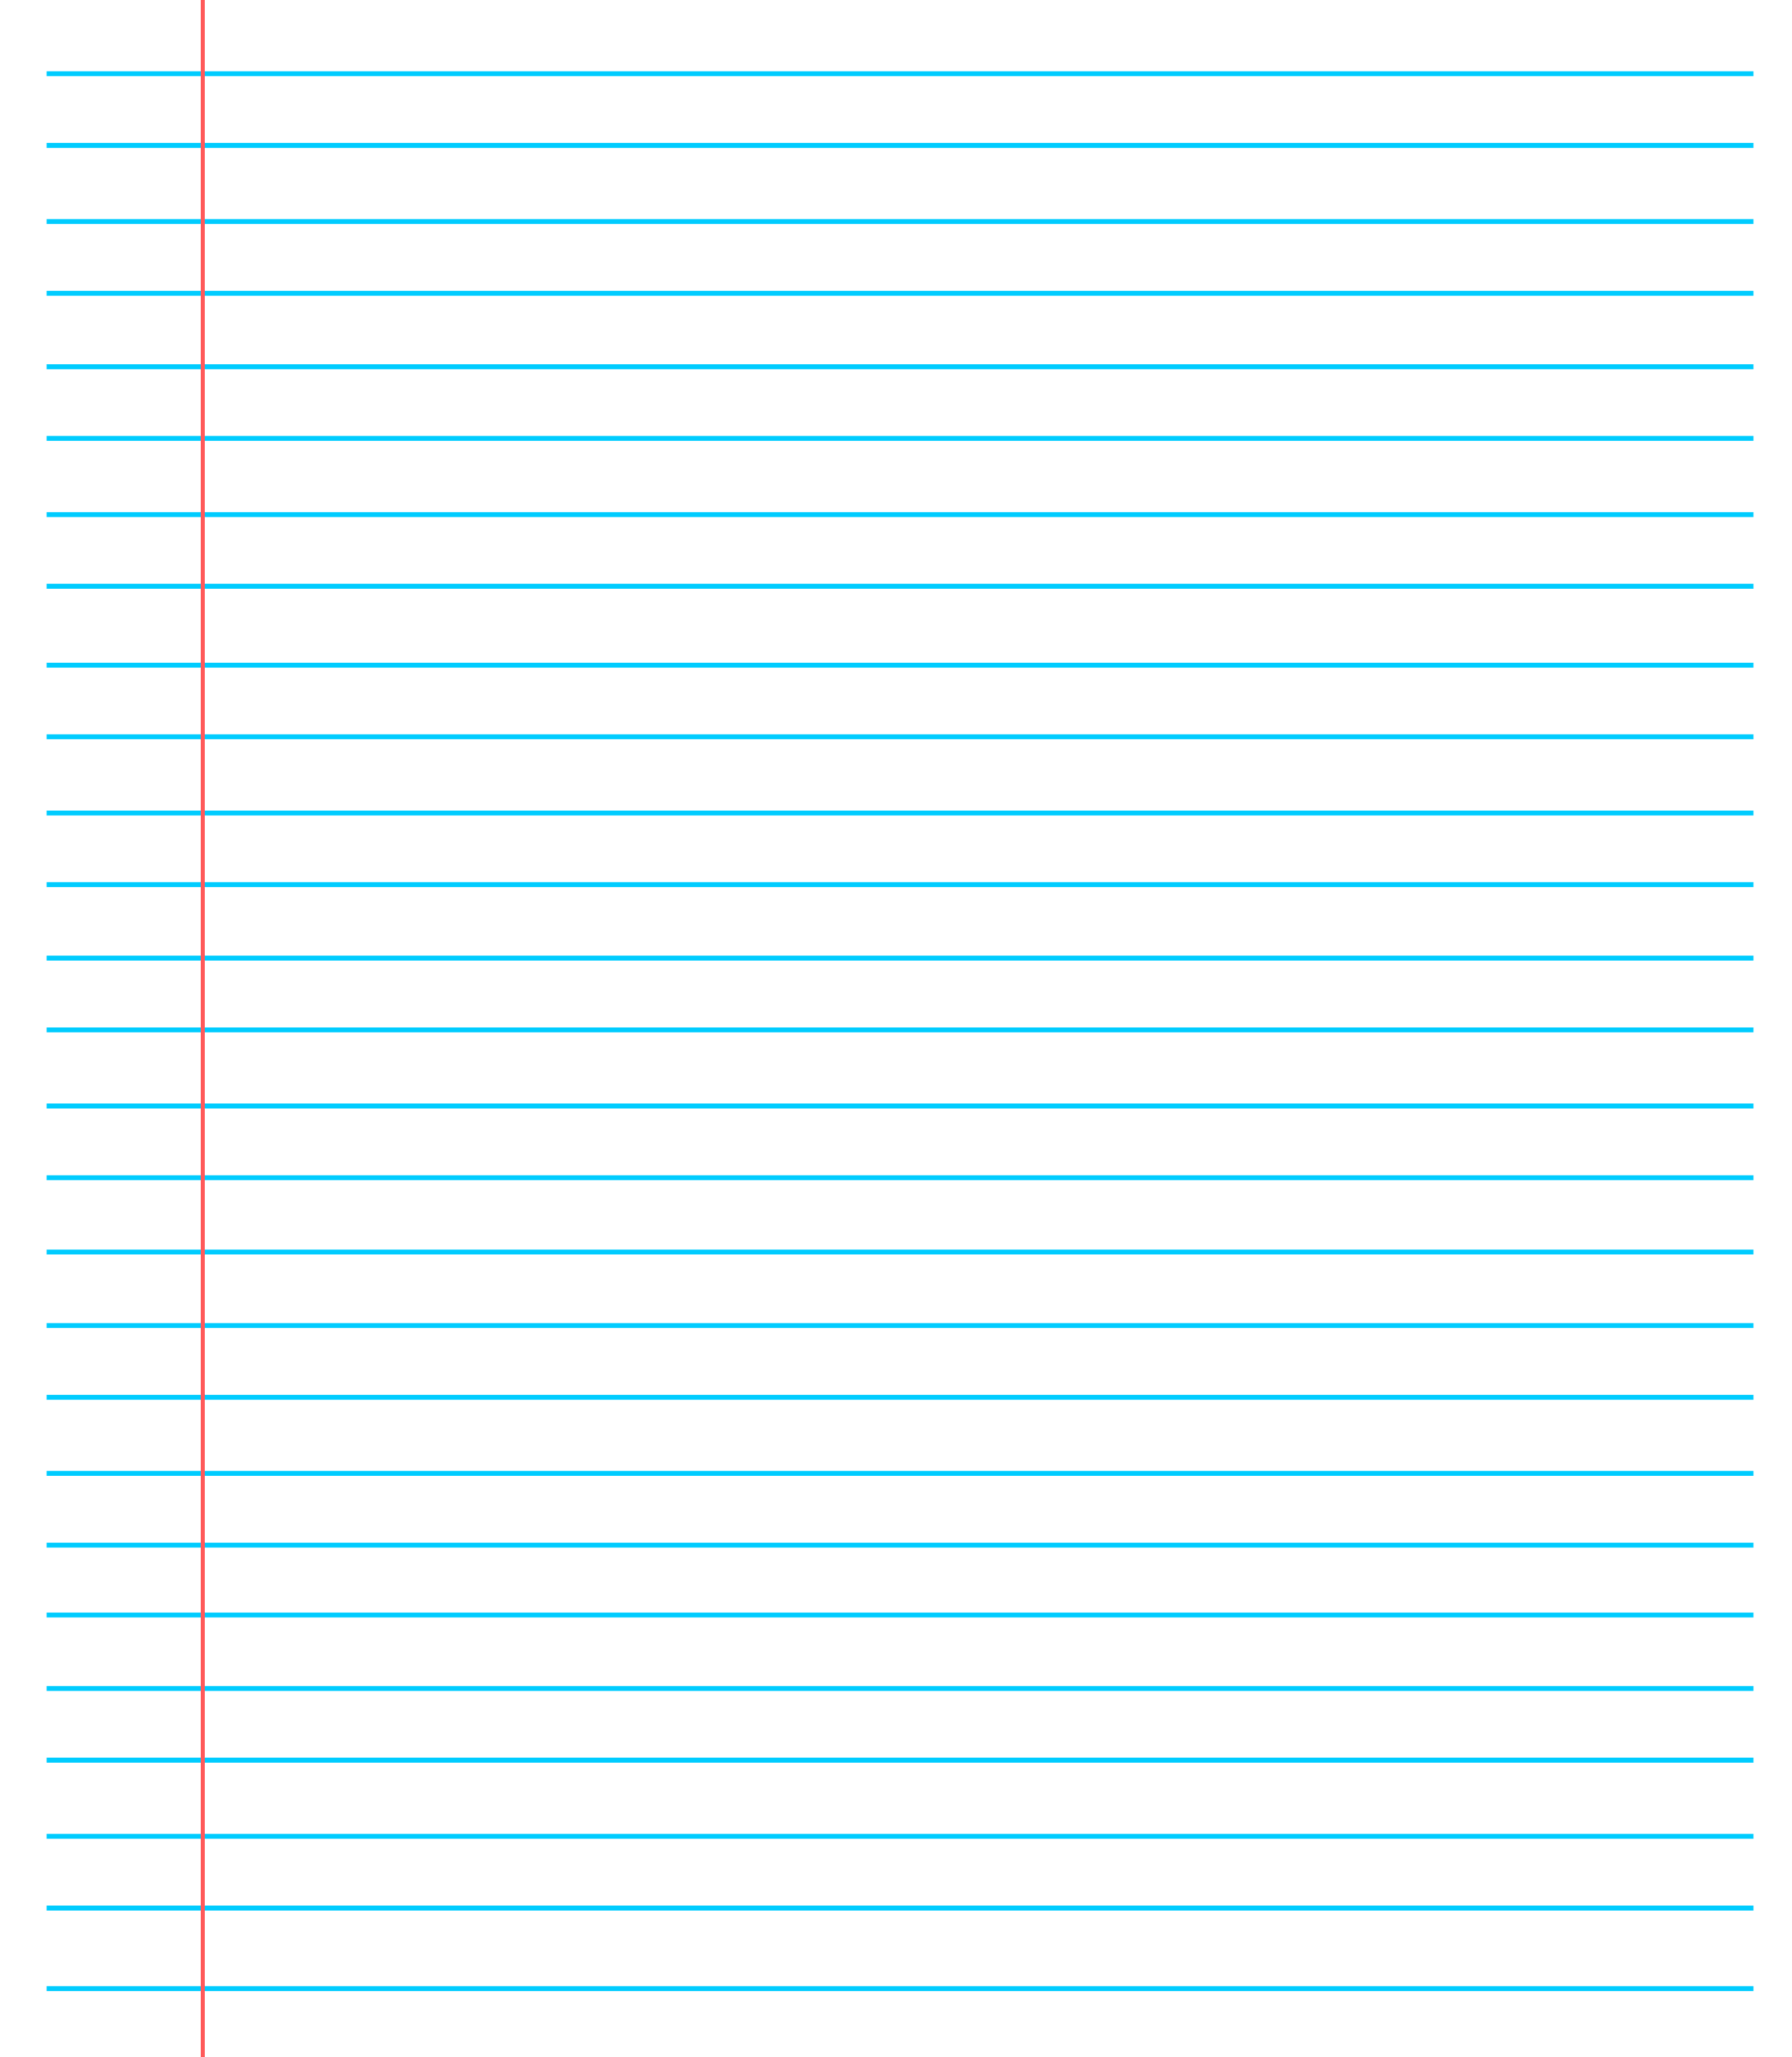 007 Blue Lined Paper Template Ideas Microsoft Fantastic Word Within Ruled Paper Template Word